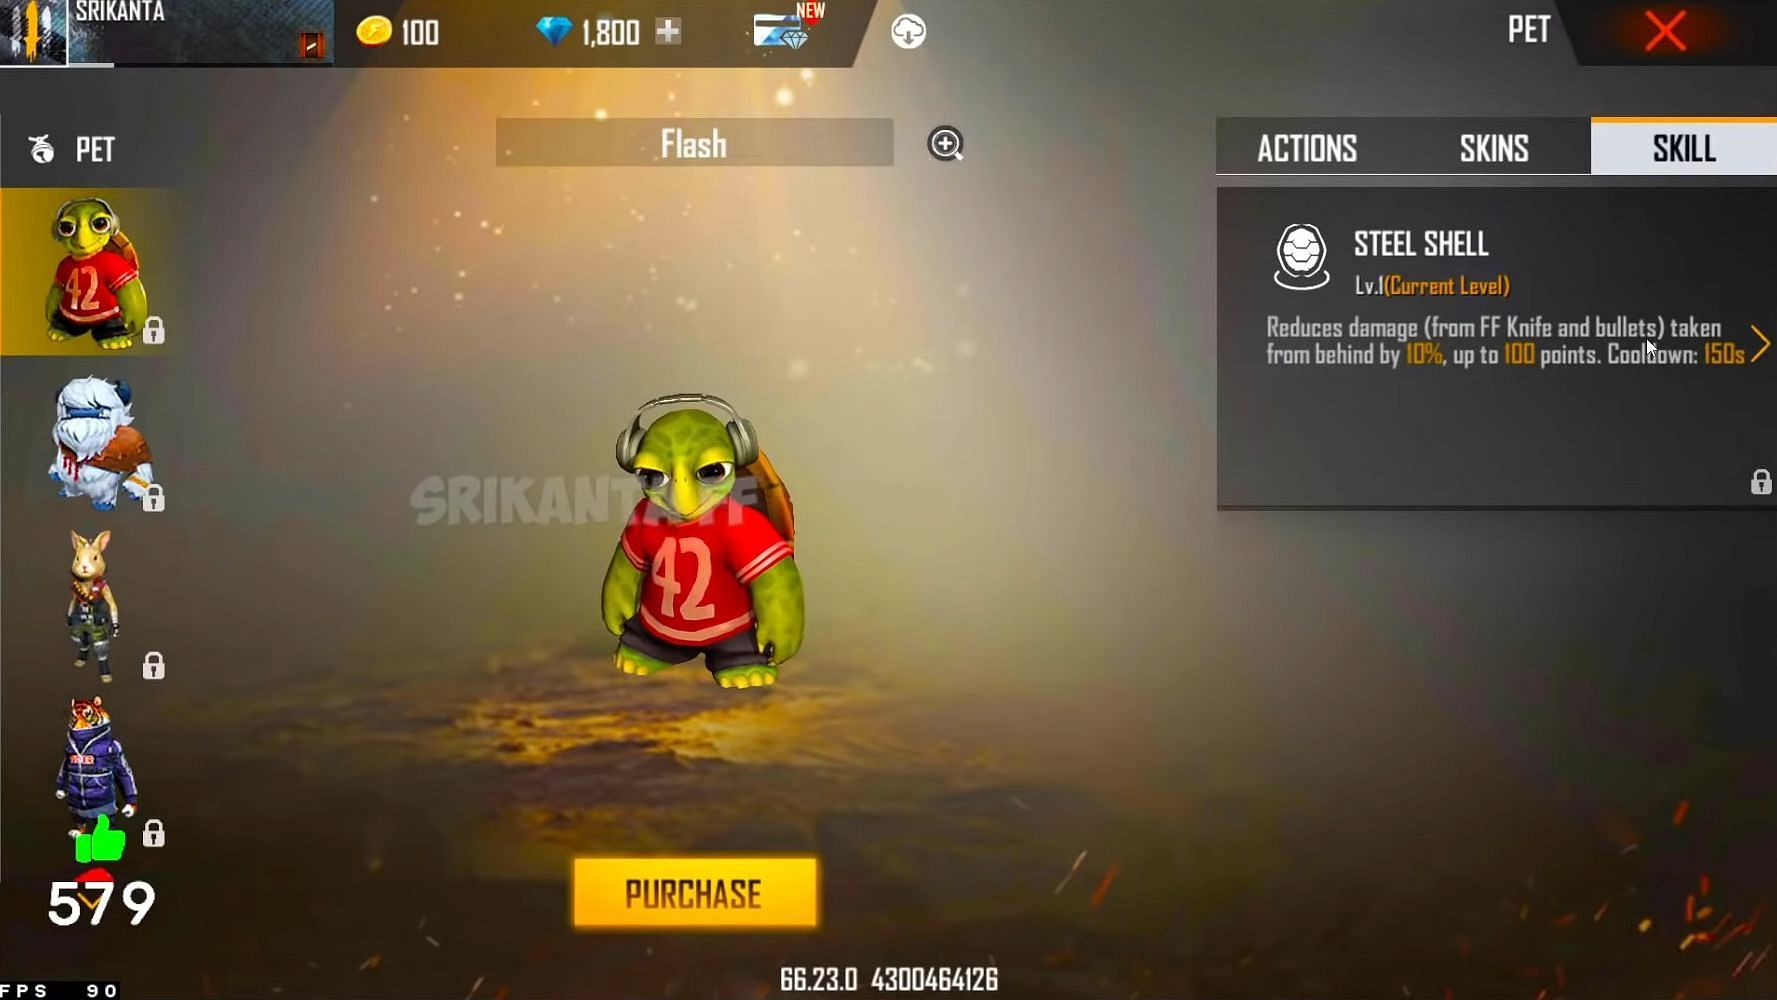 The pet could be an interesting addition to Free Fire (Image via YouTube/Srikanta)